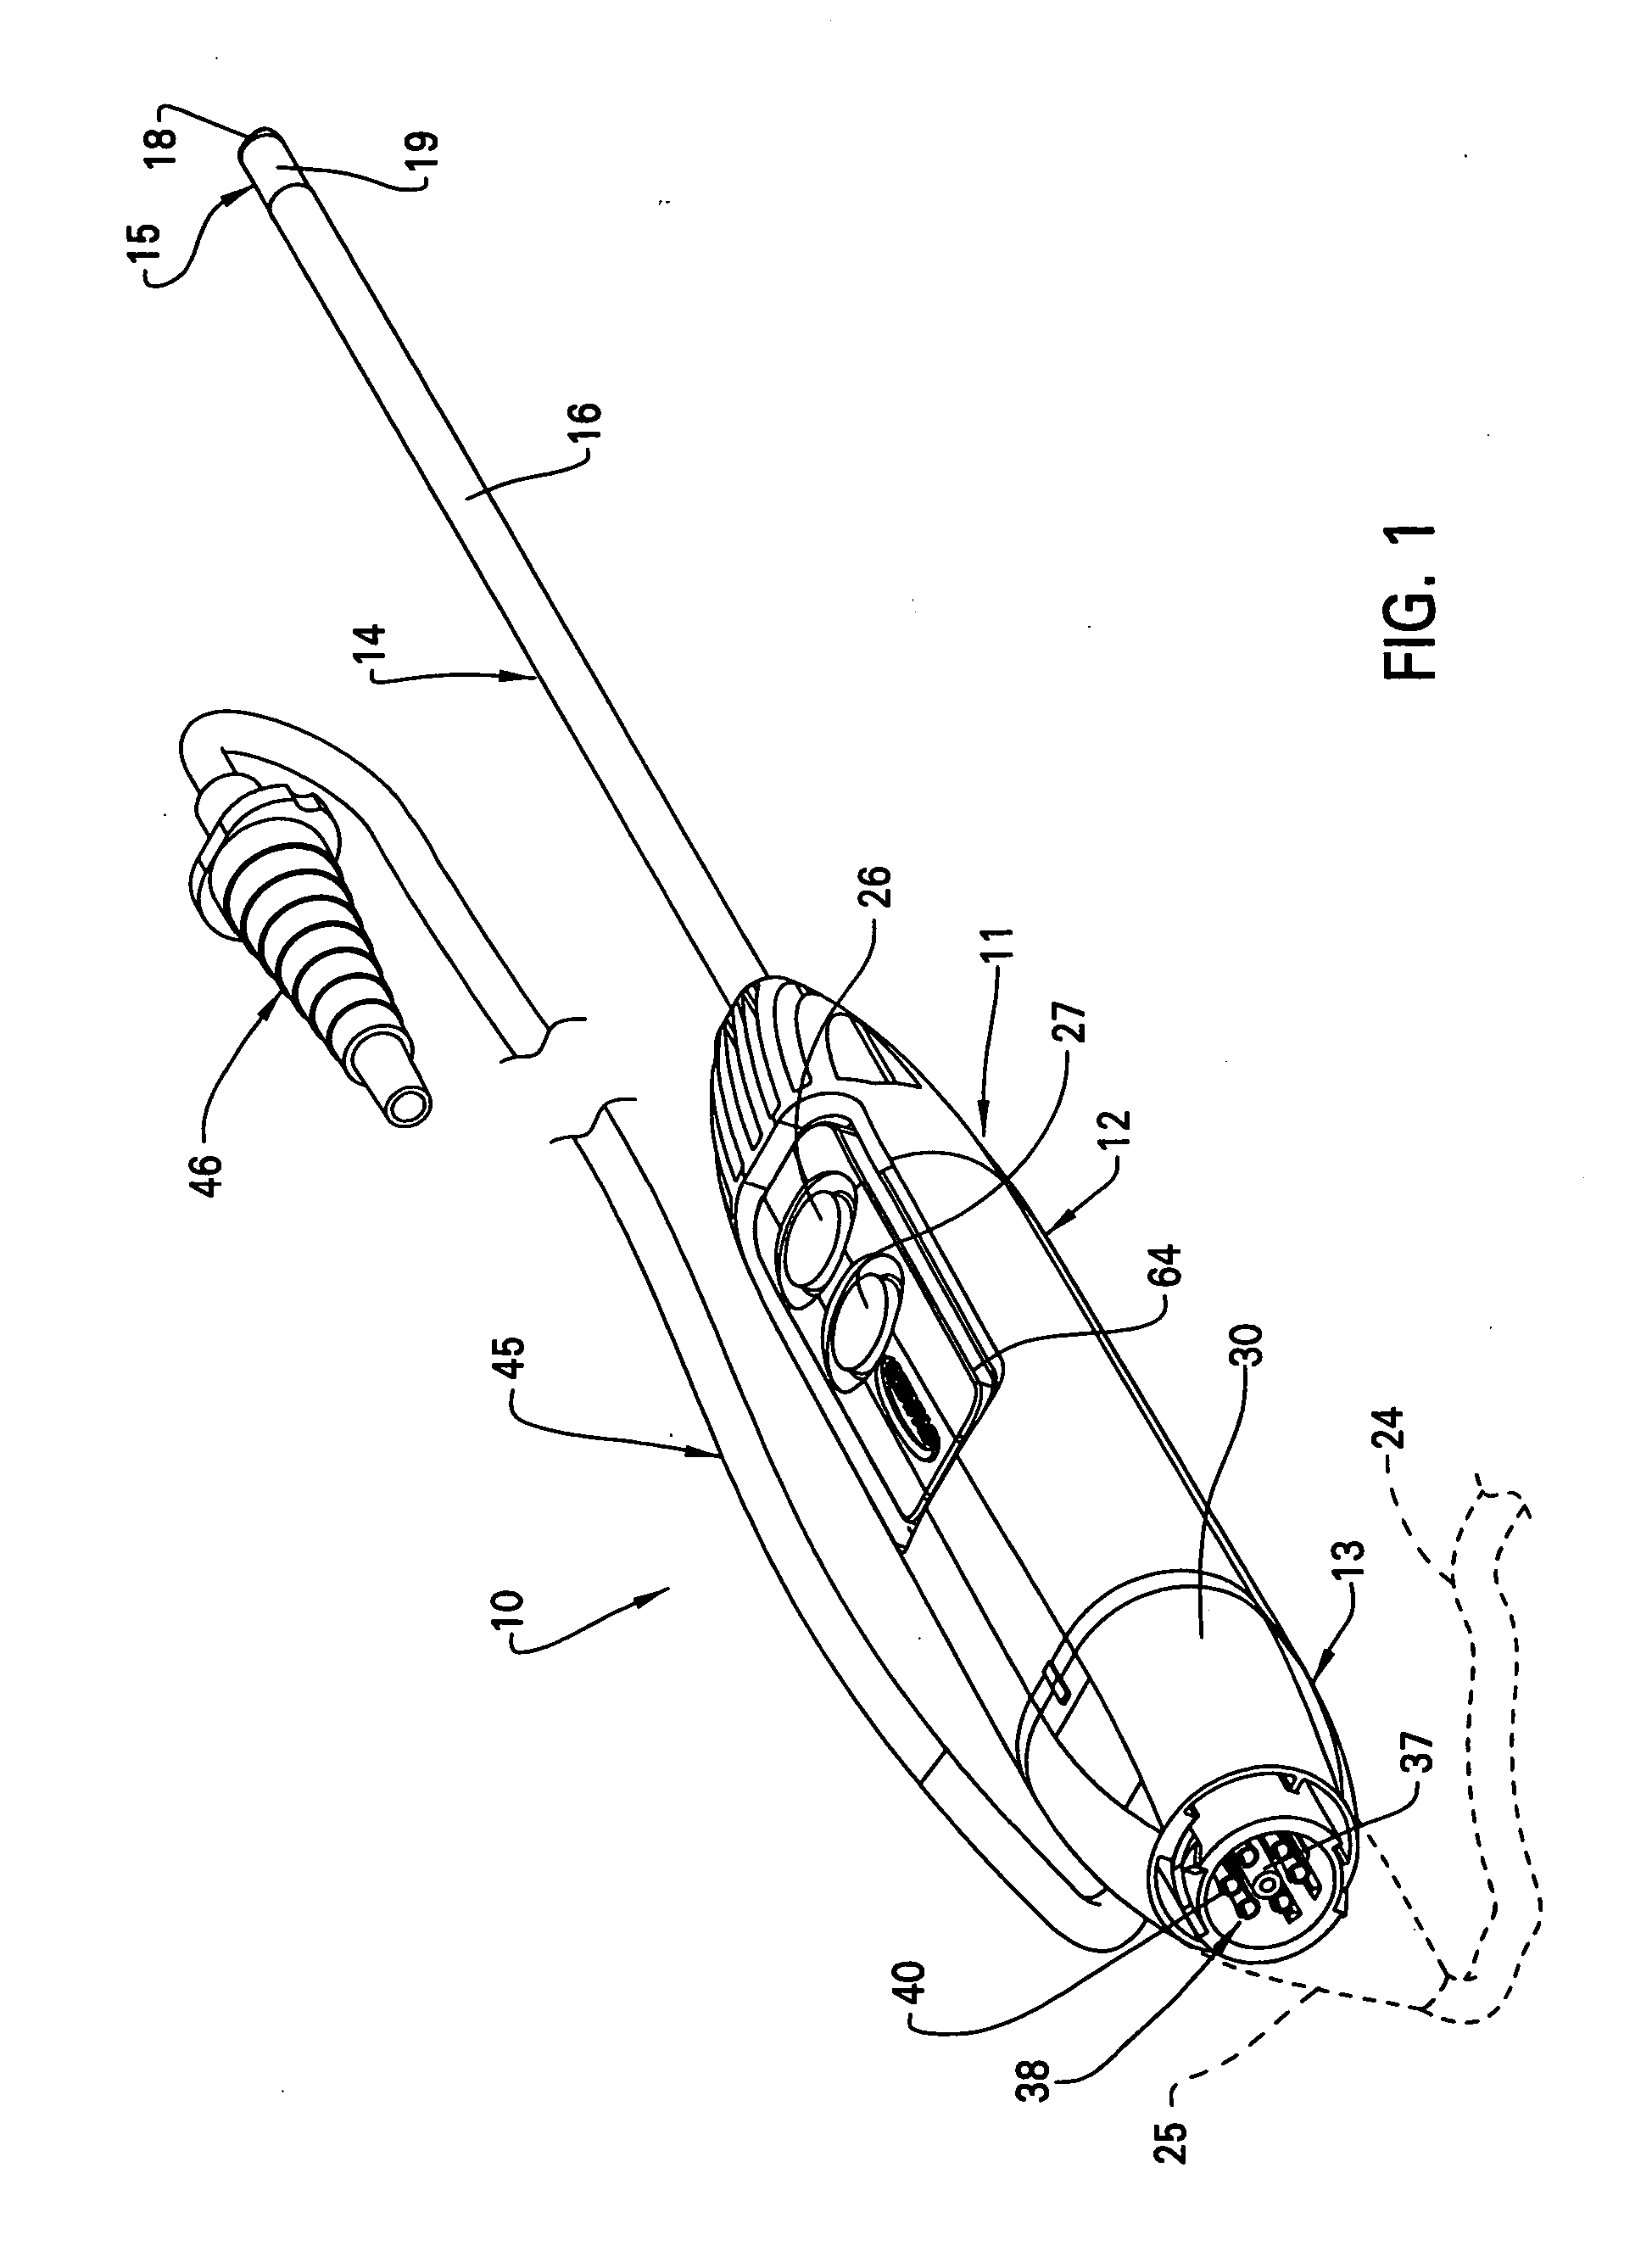 Electrosurgical tool